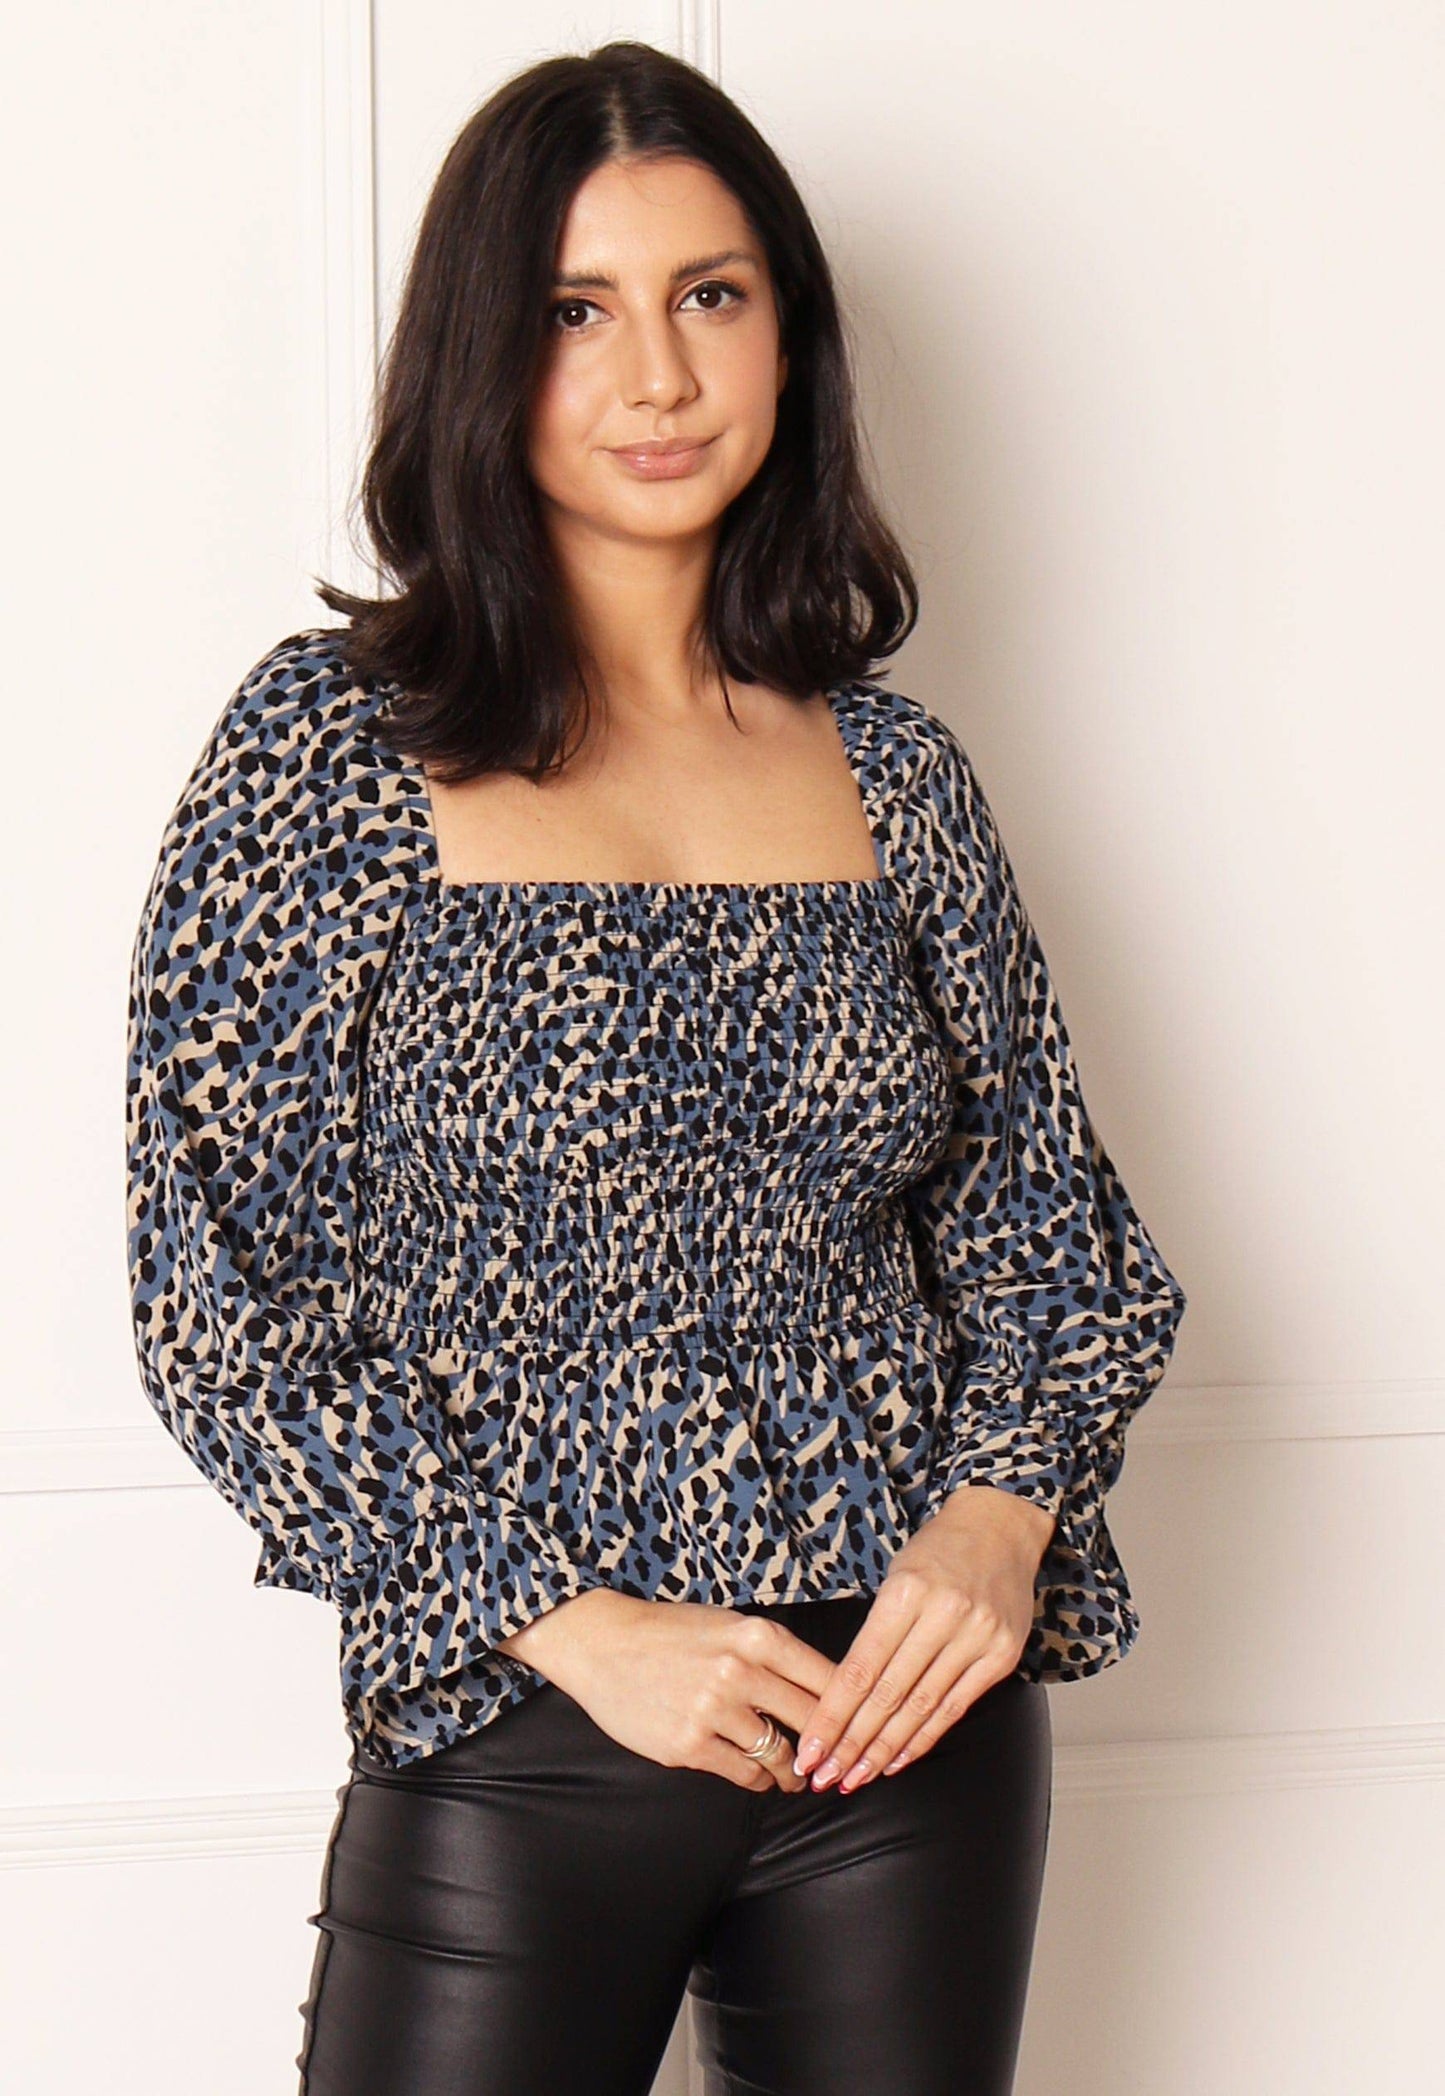 ONLY Lux Animal Print Shirred Top in Blue, Beige & Black - concretebartops